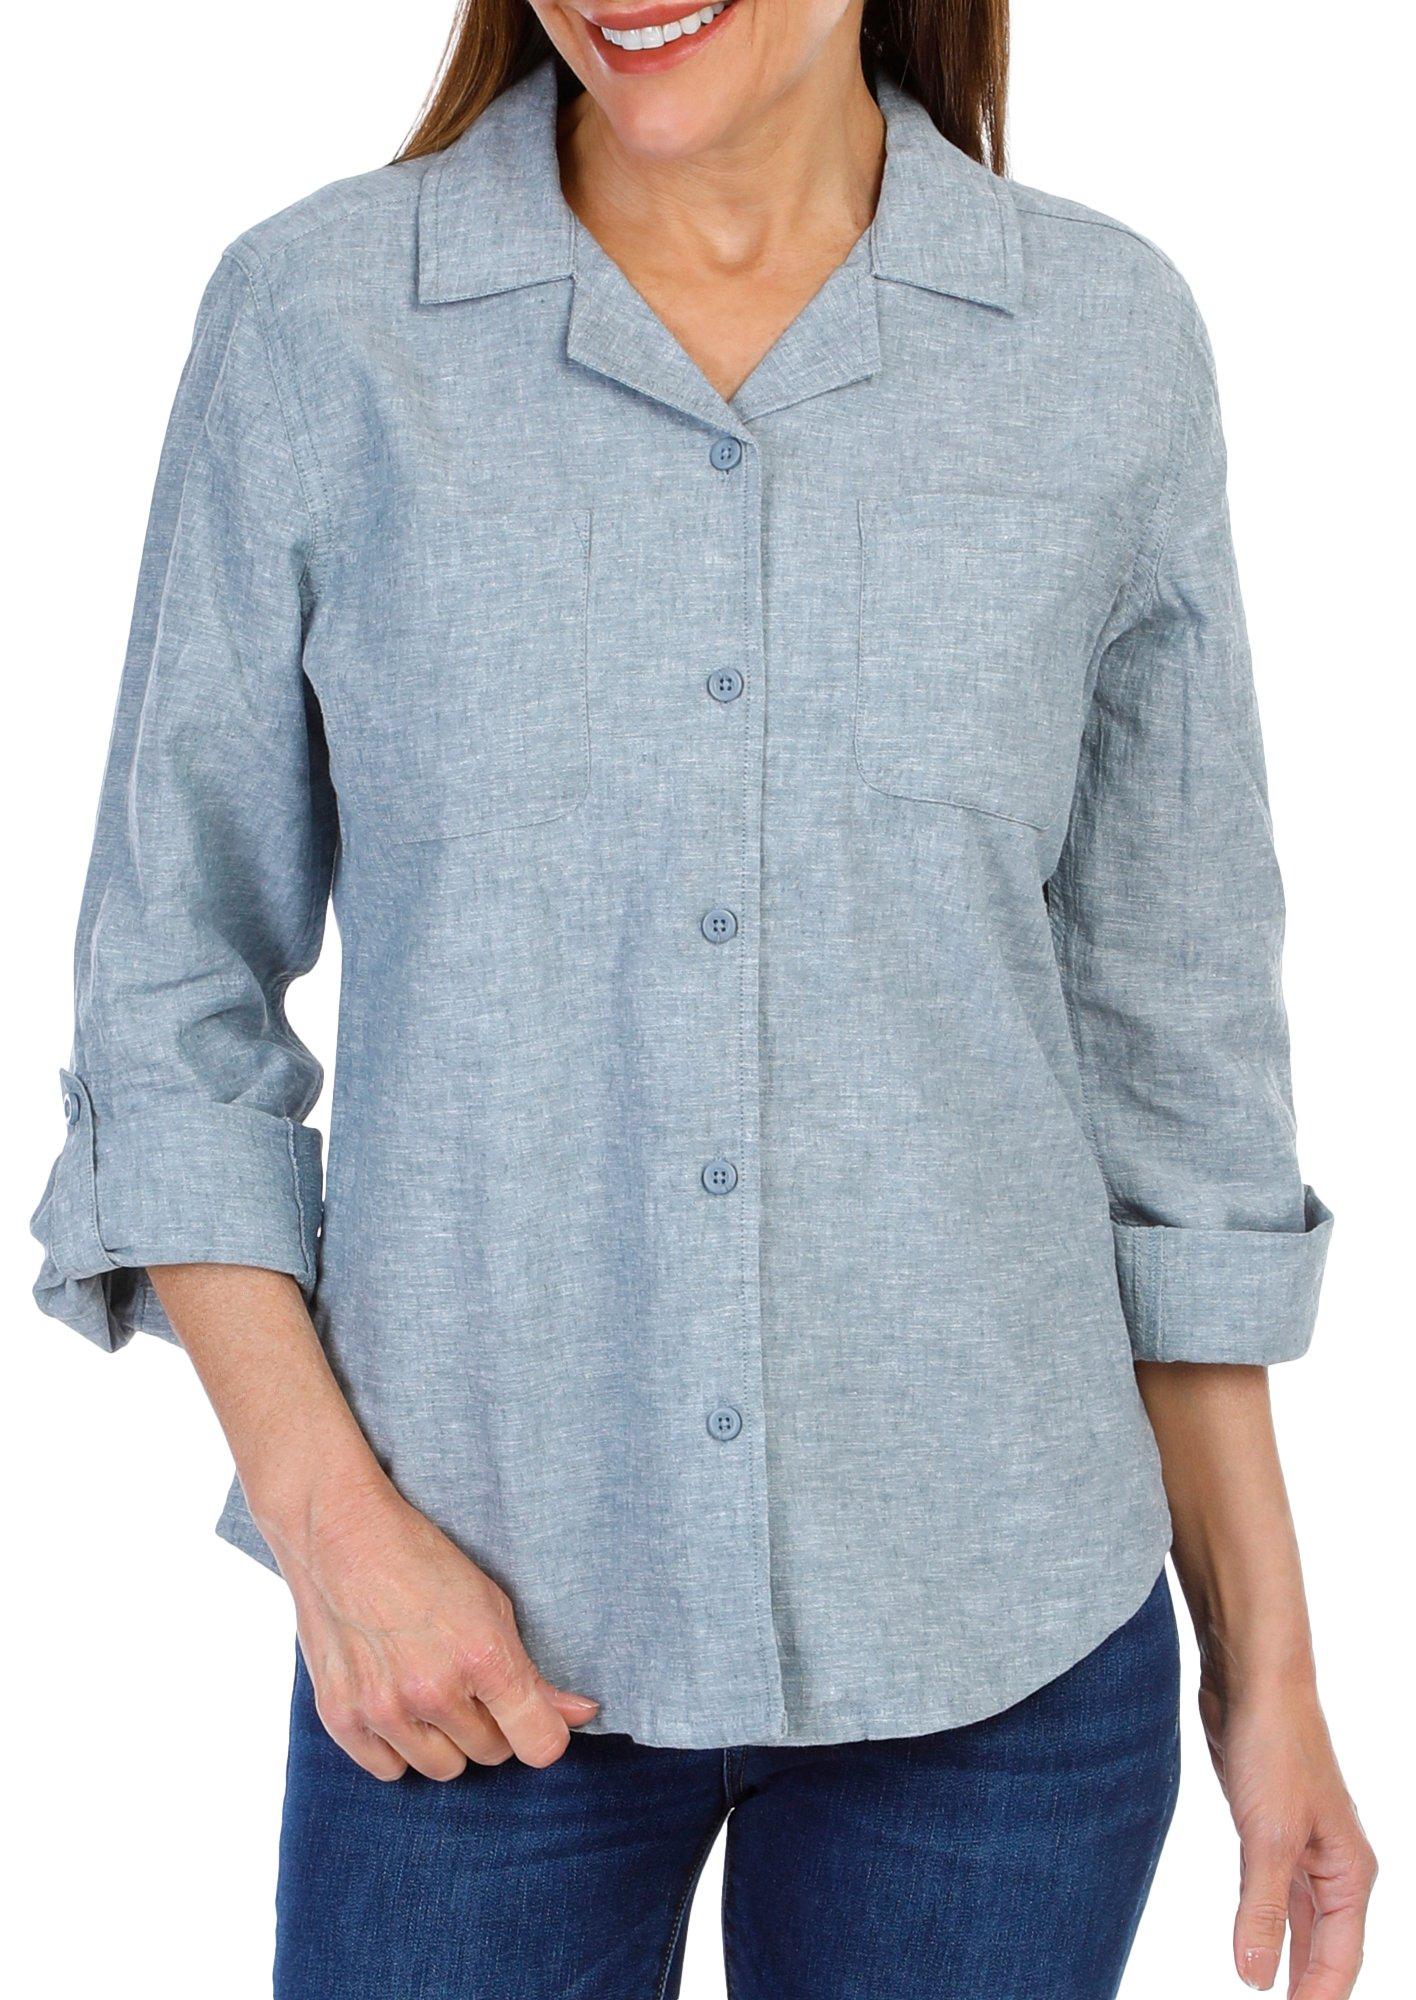 Women's Solid Button Down Top